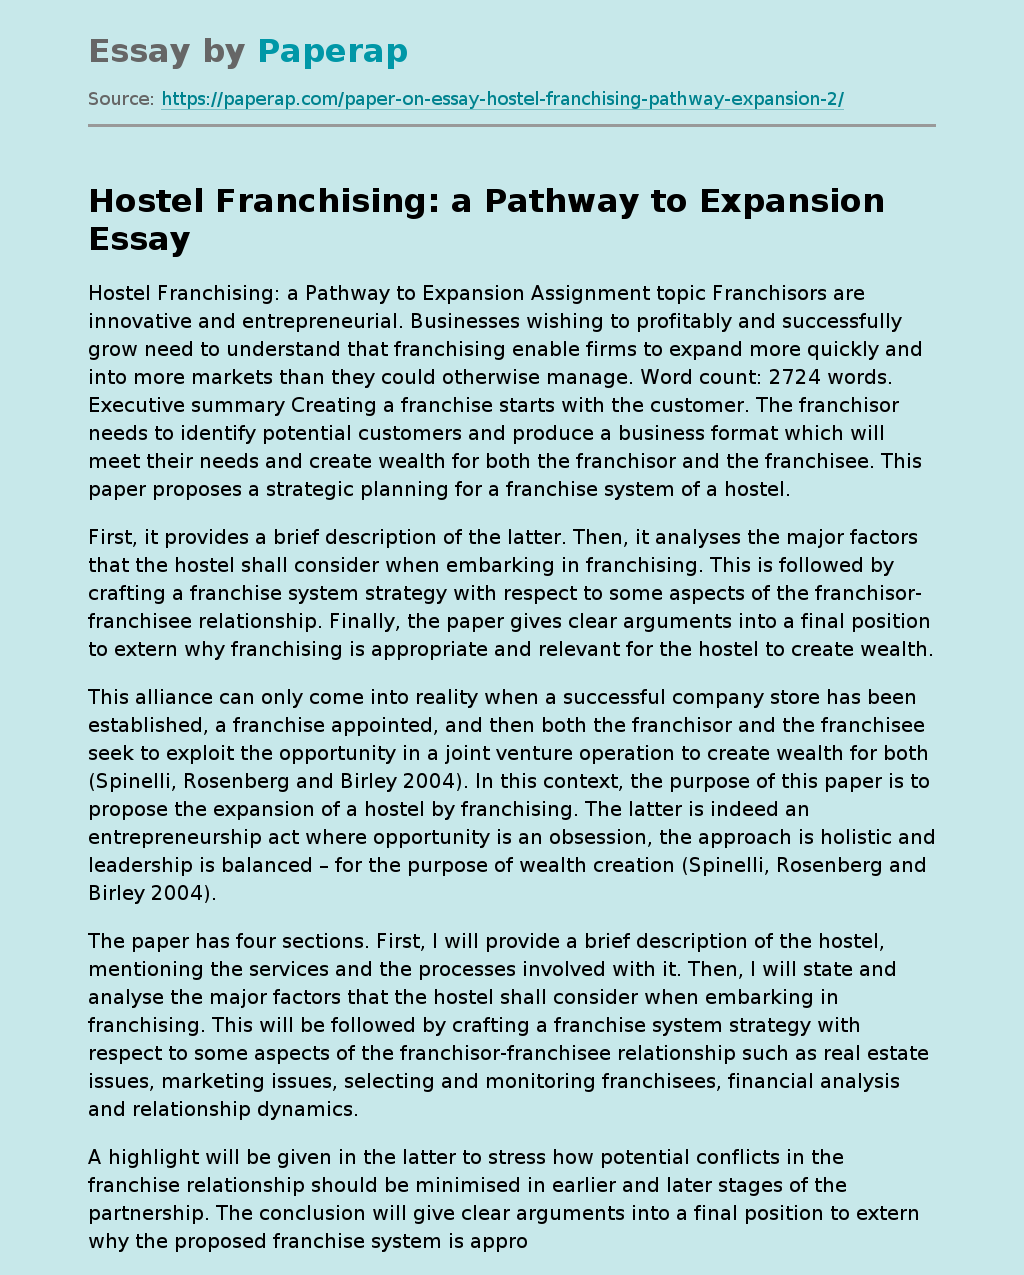 Hostel Franchising: a Pathway to Expansion